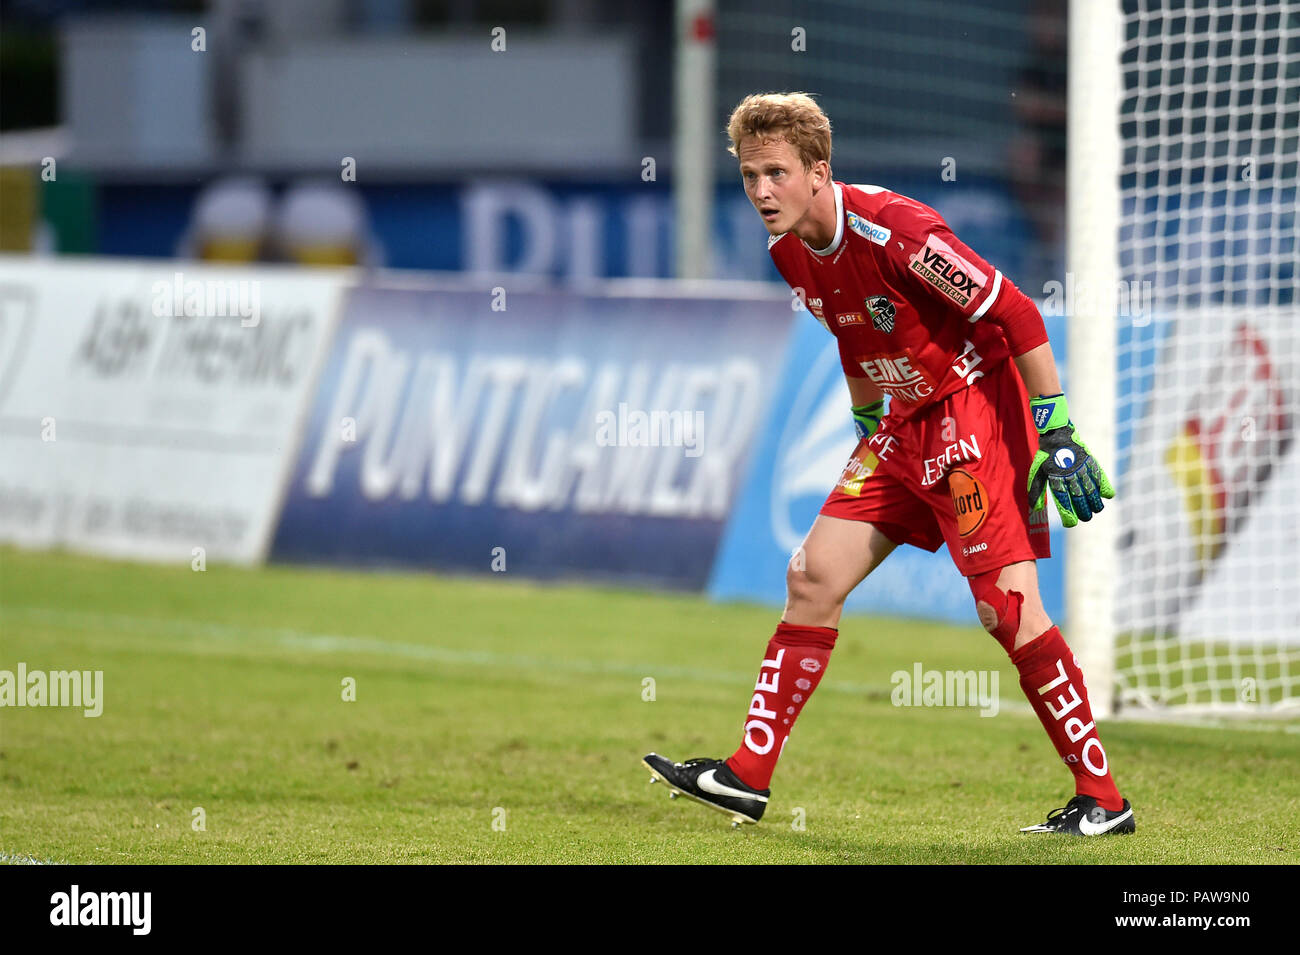 Wolfsberger, Austria, 24 July 2018. The goalkeeper Dobnik looks on during the pre season friendly football match between RZ Pellets WAC and Udinese Calcio at Lavanttal Arena. photo Simone Ferraro / Alamy Live News Stock Photo